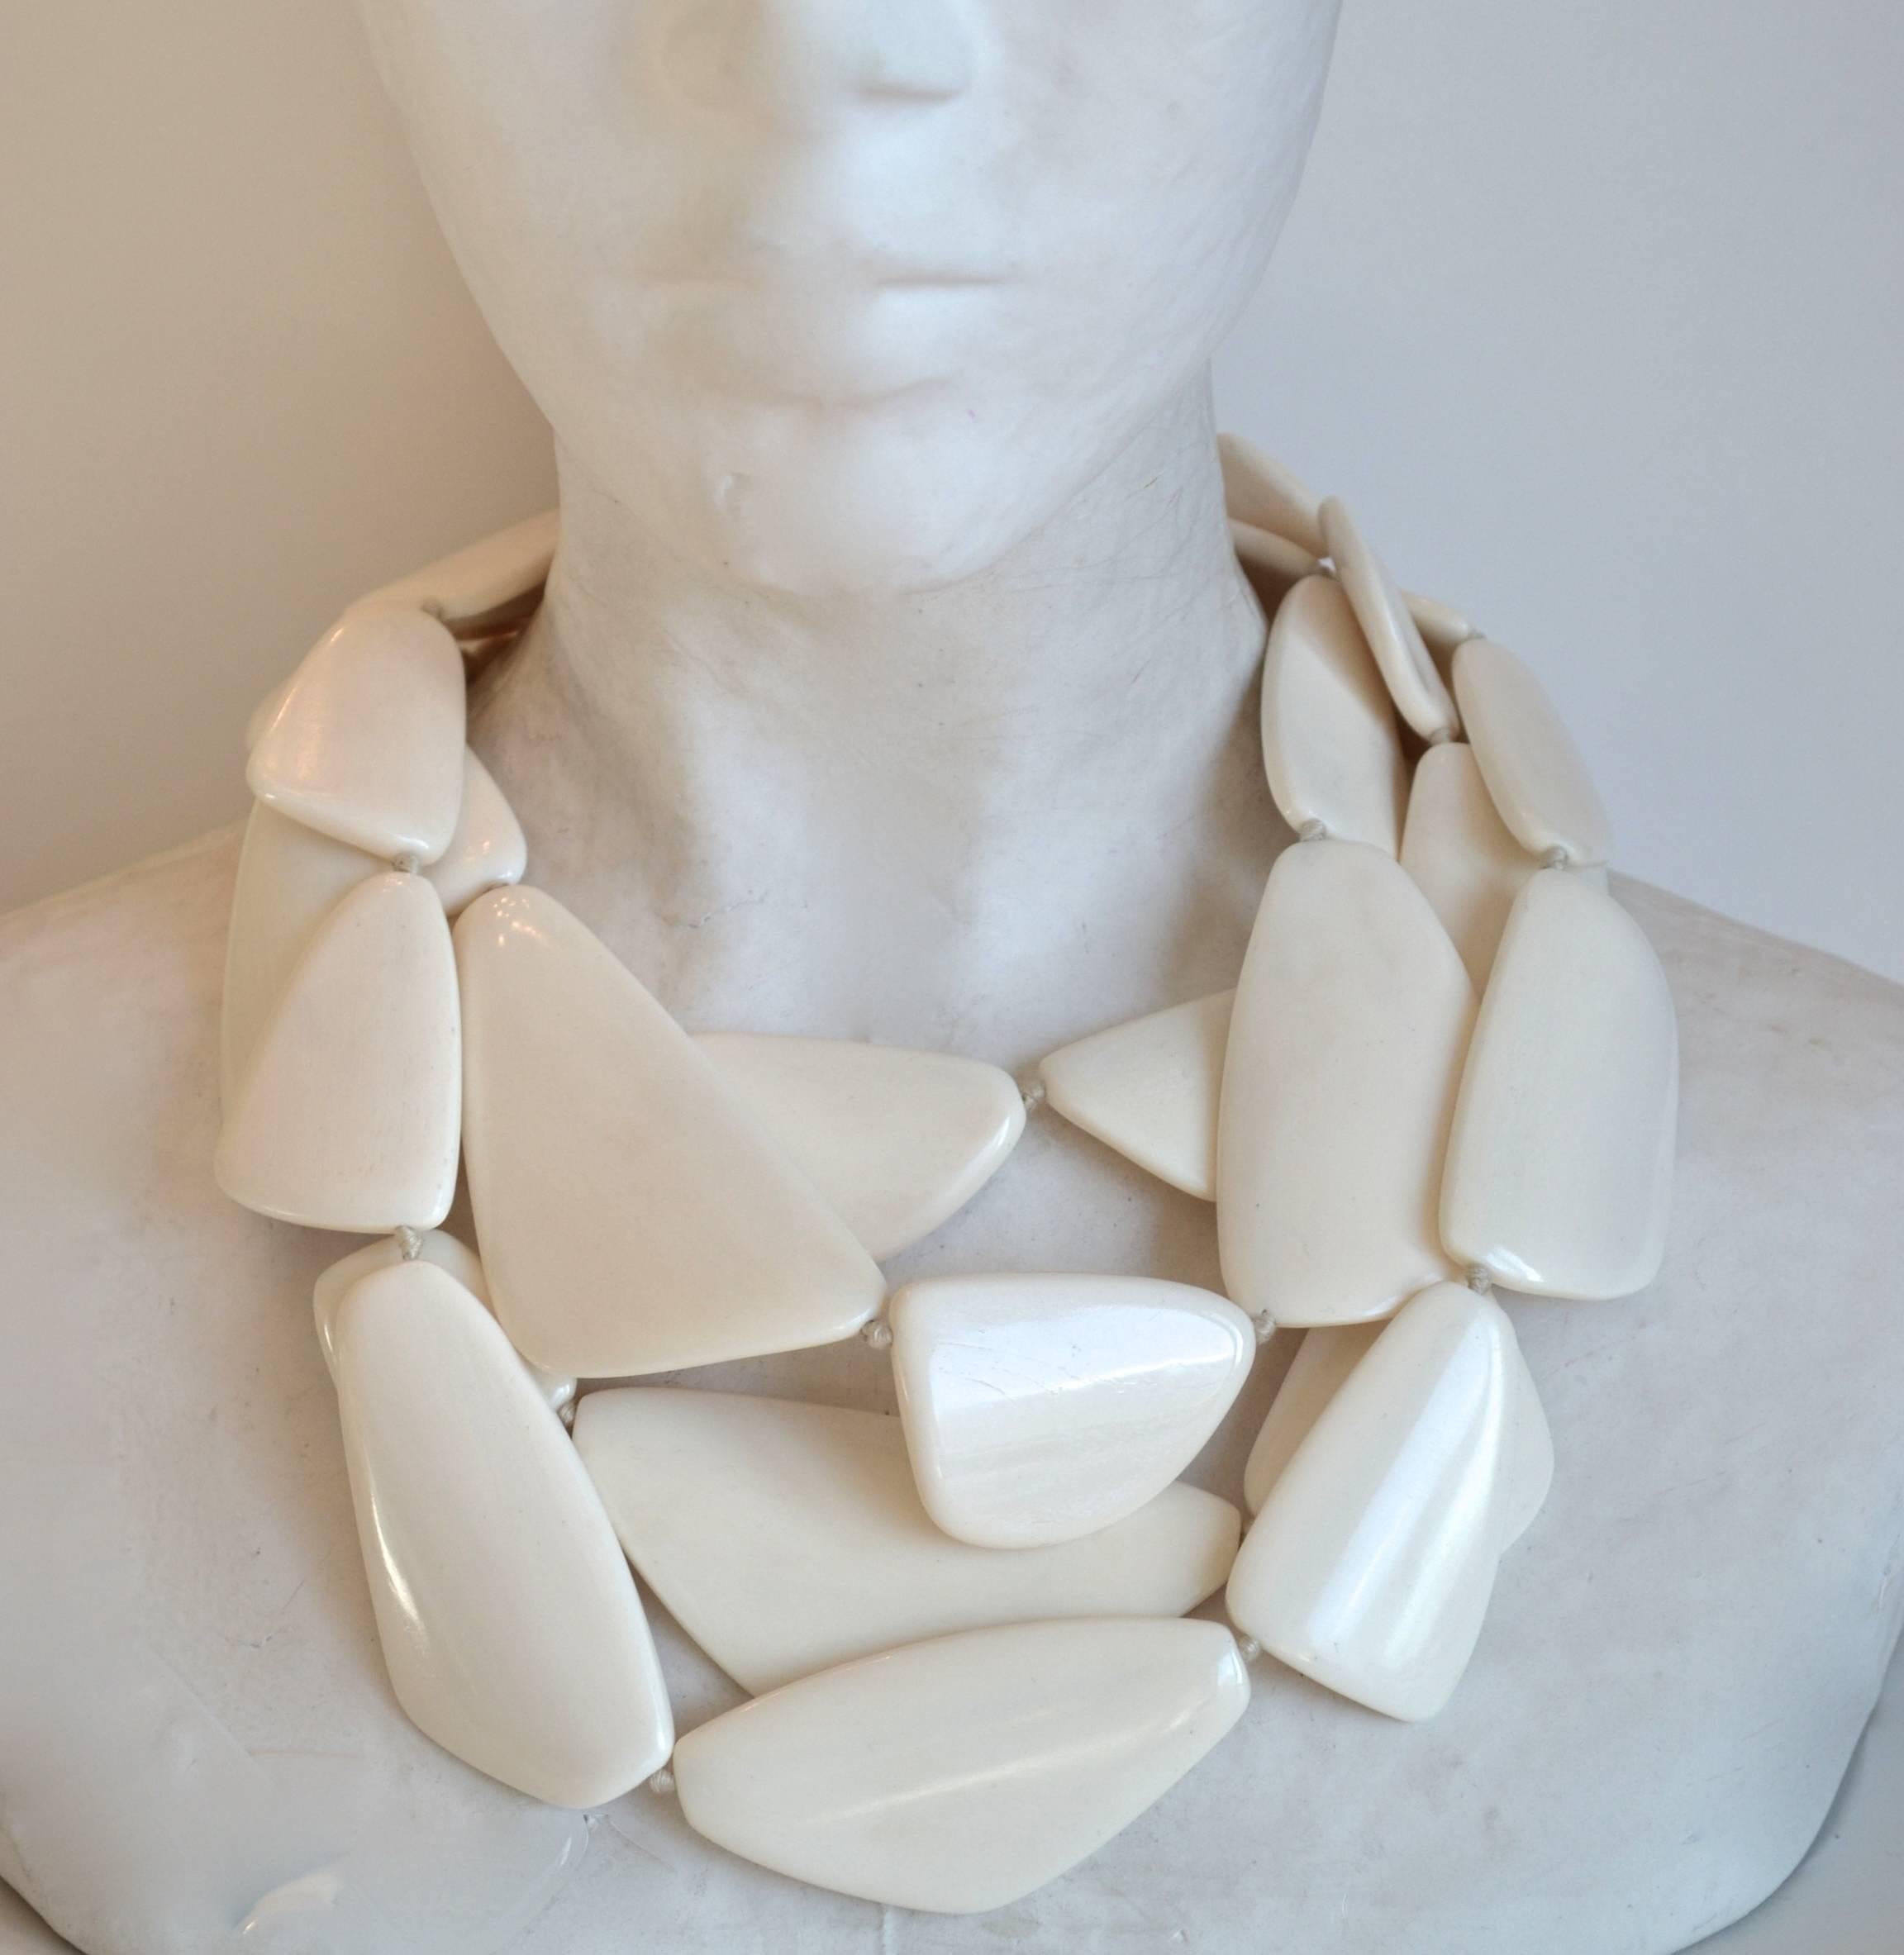 Modern and chic statement necklace made with horn from Danish design house Monies. Very lightweight and soft on the skin. 